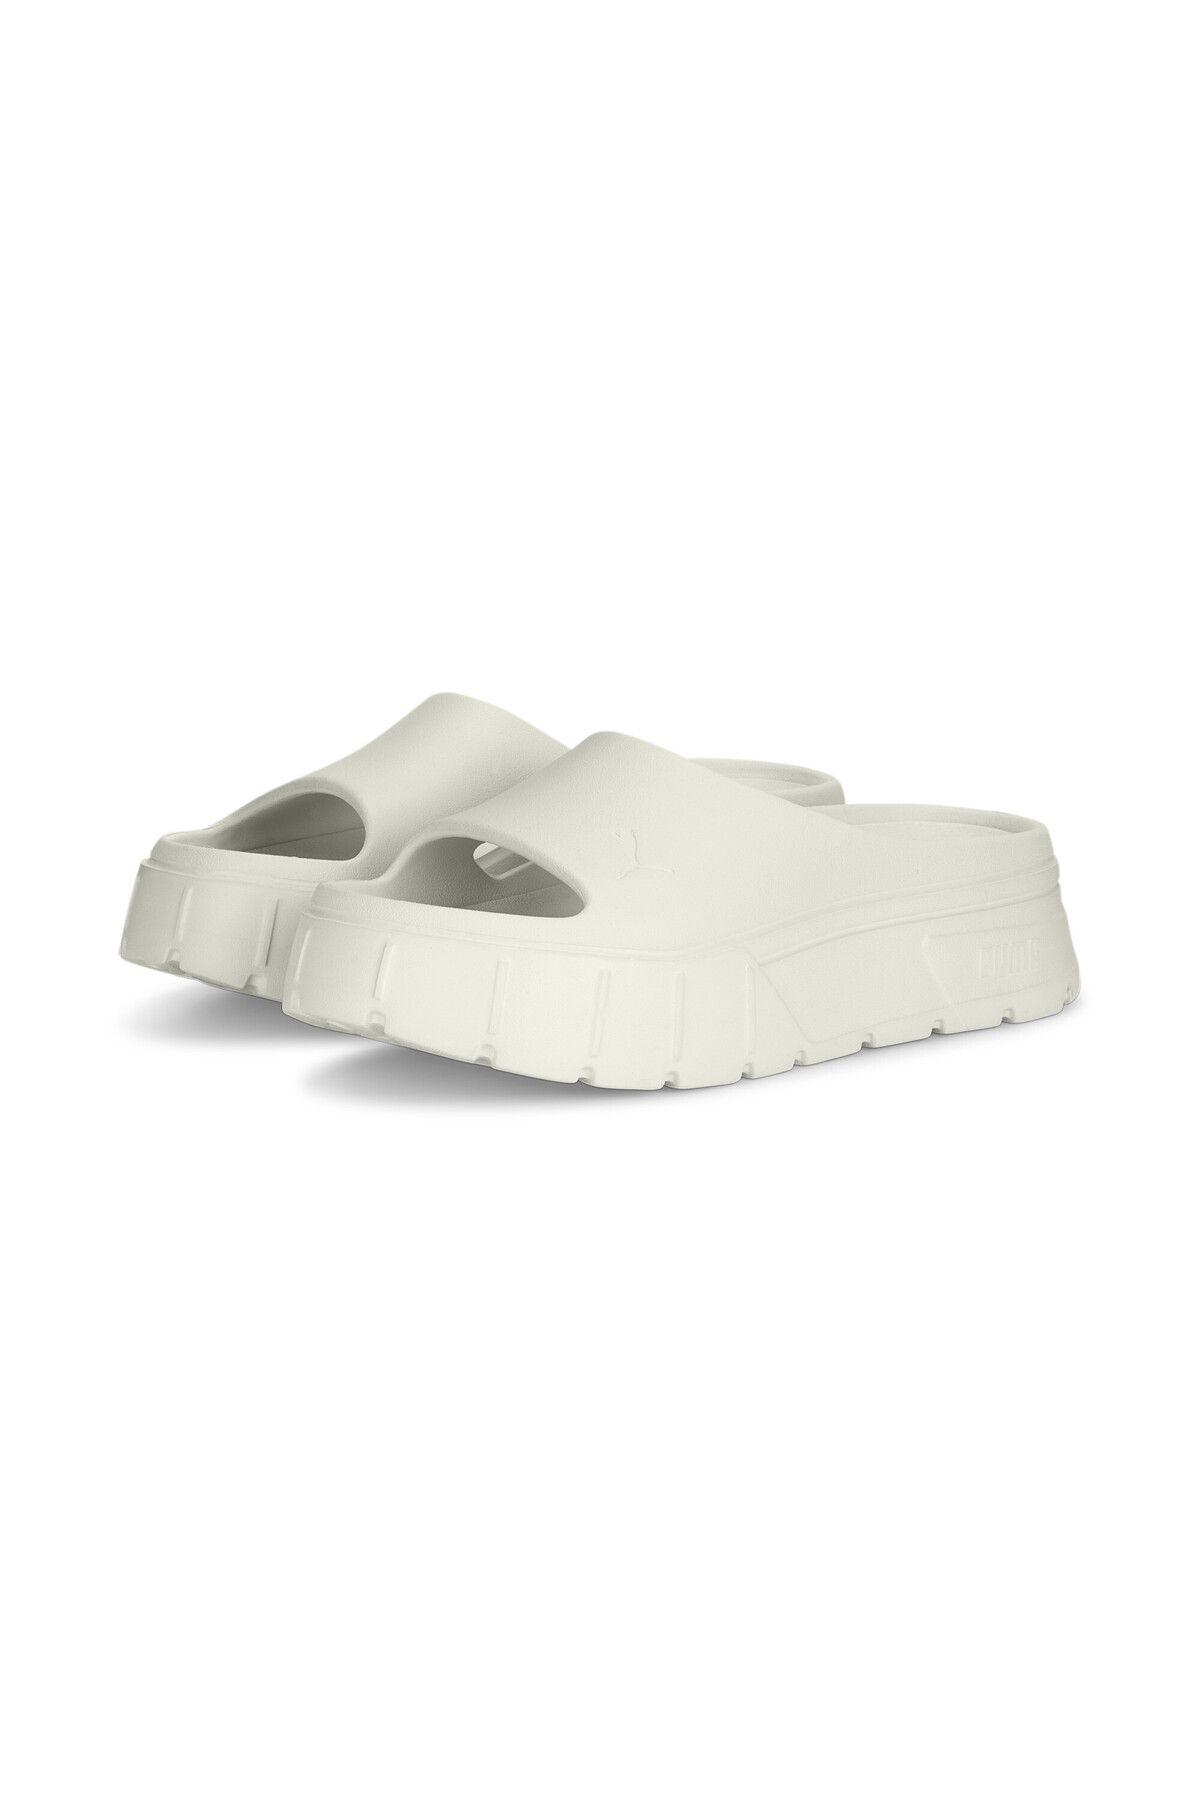 Puma Mayze Stack Injex Wns Frosted Ivory